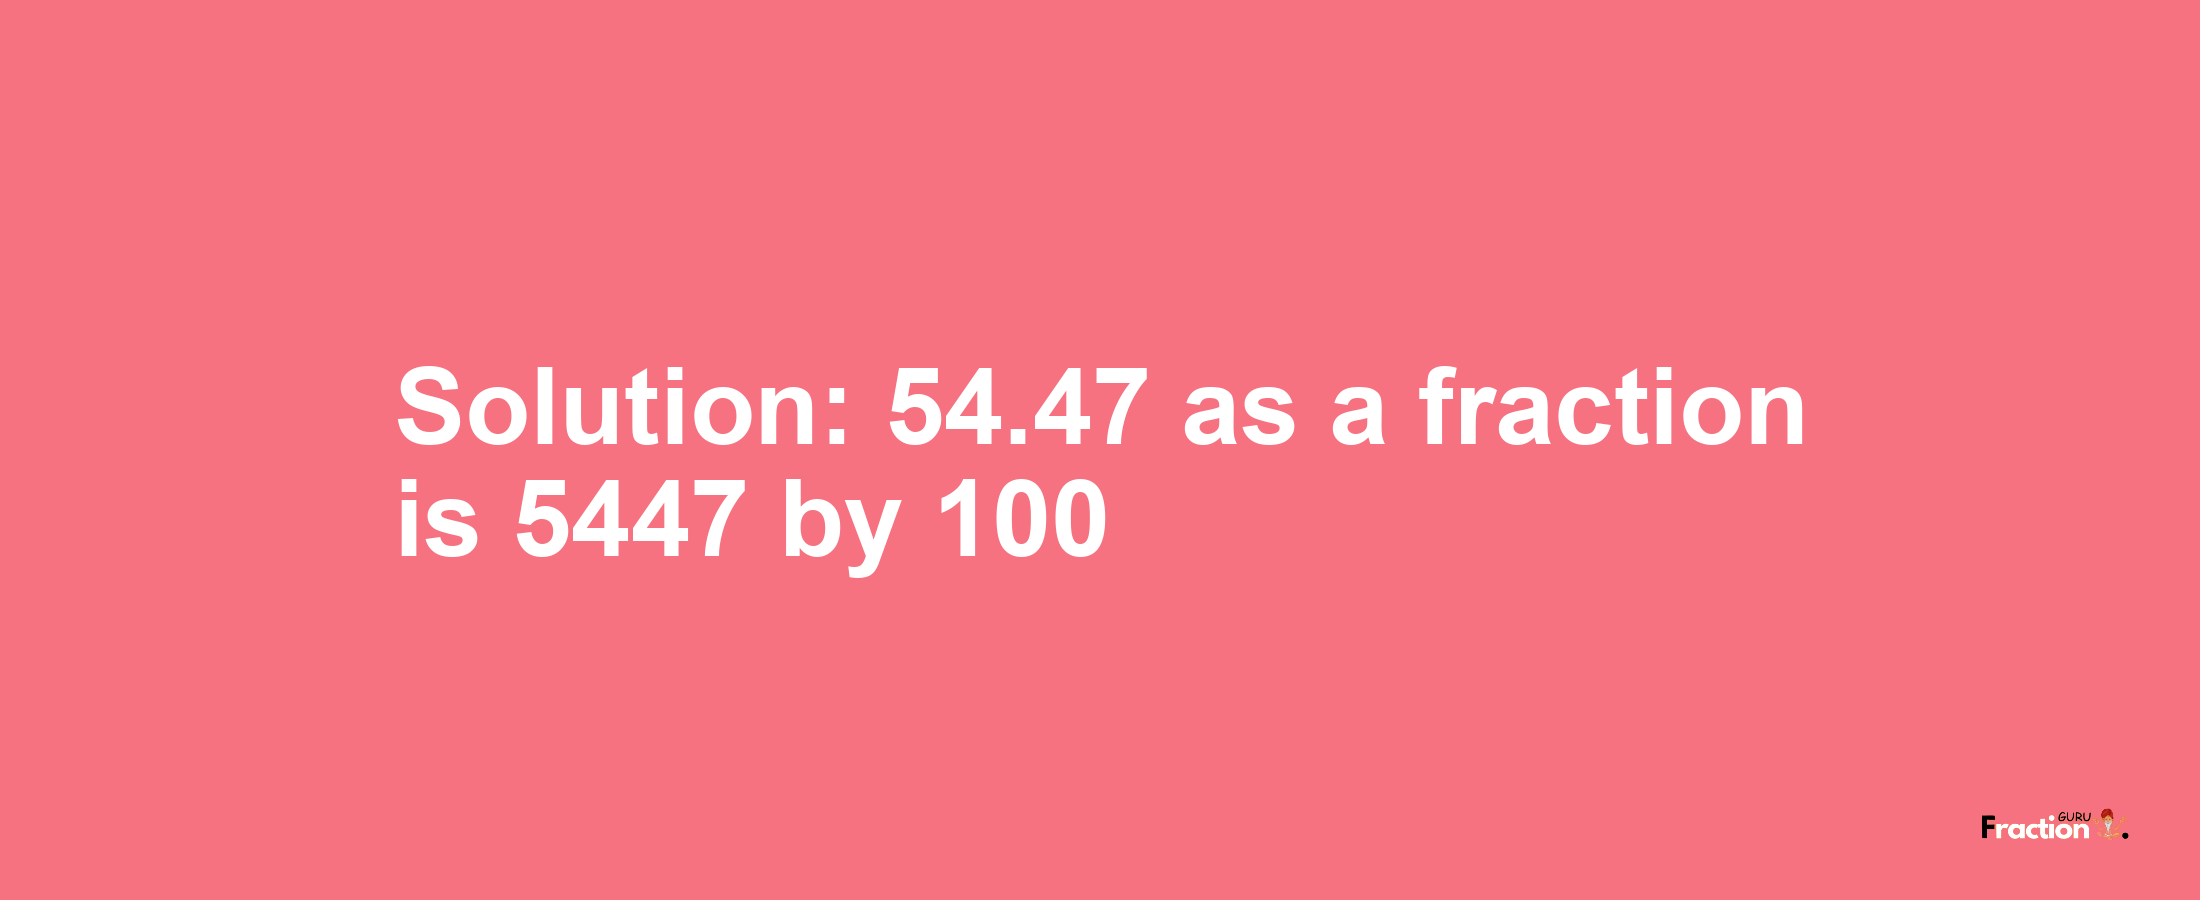 Solution:54.47 as a fraction is 5447/100